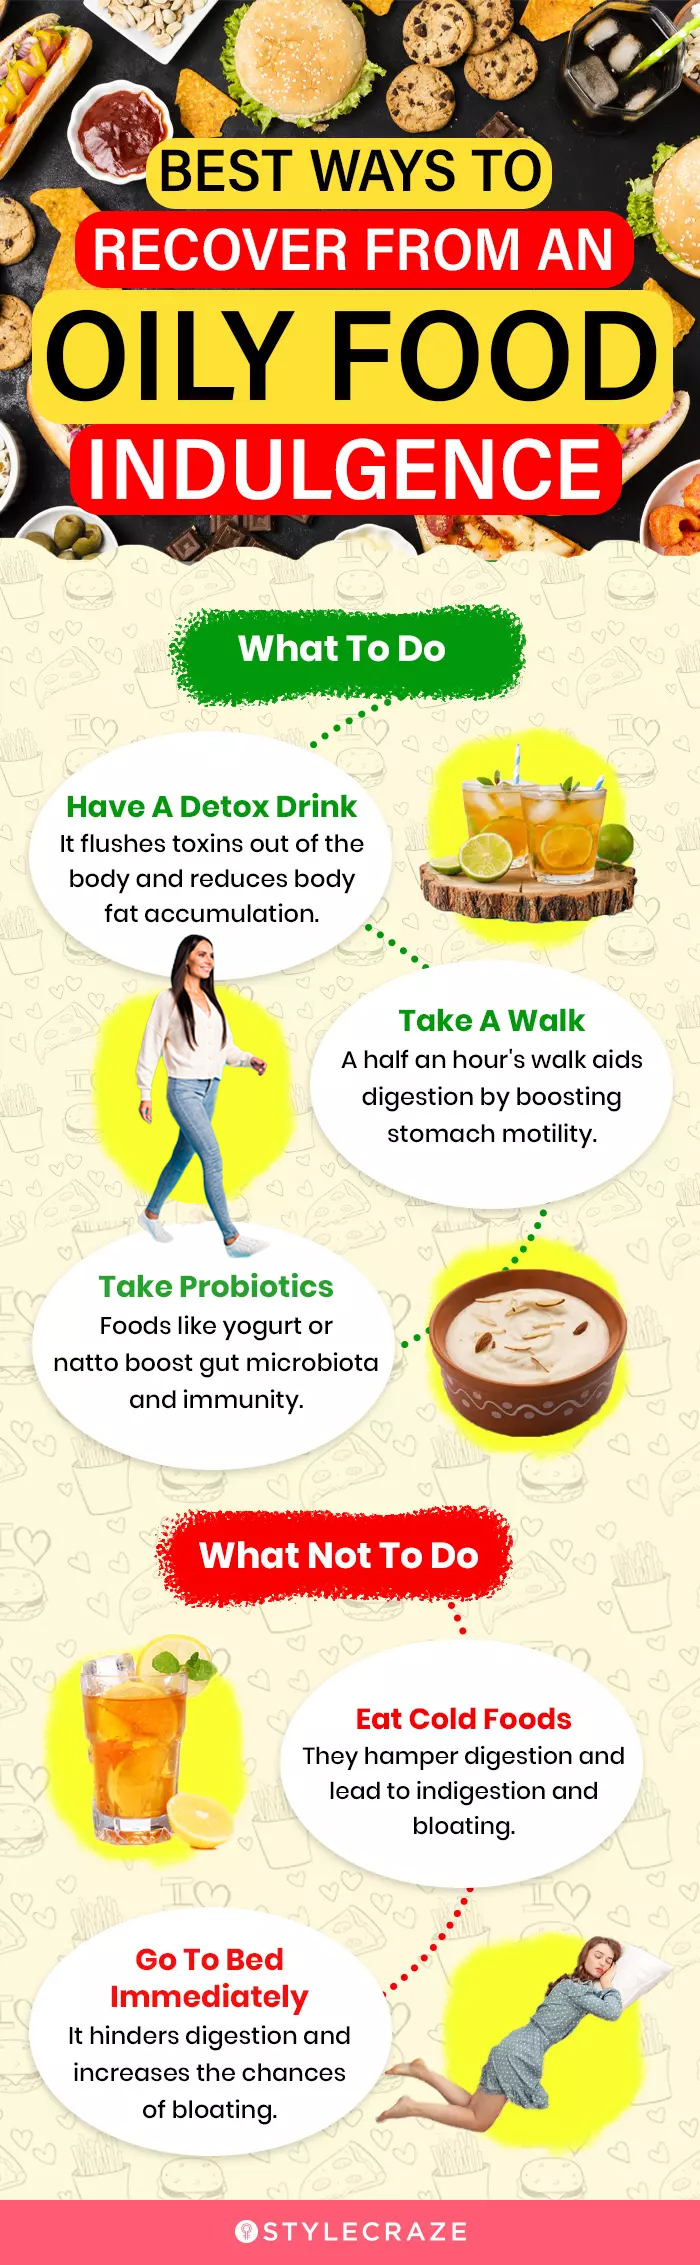 best ways to recover from an oily food indulgence (infographic)